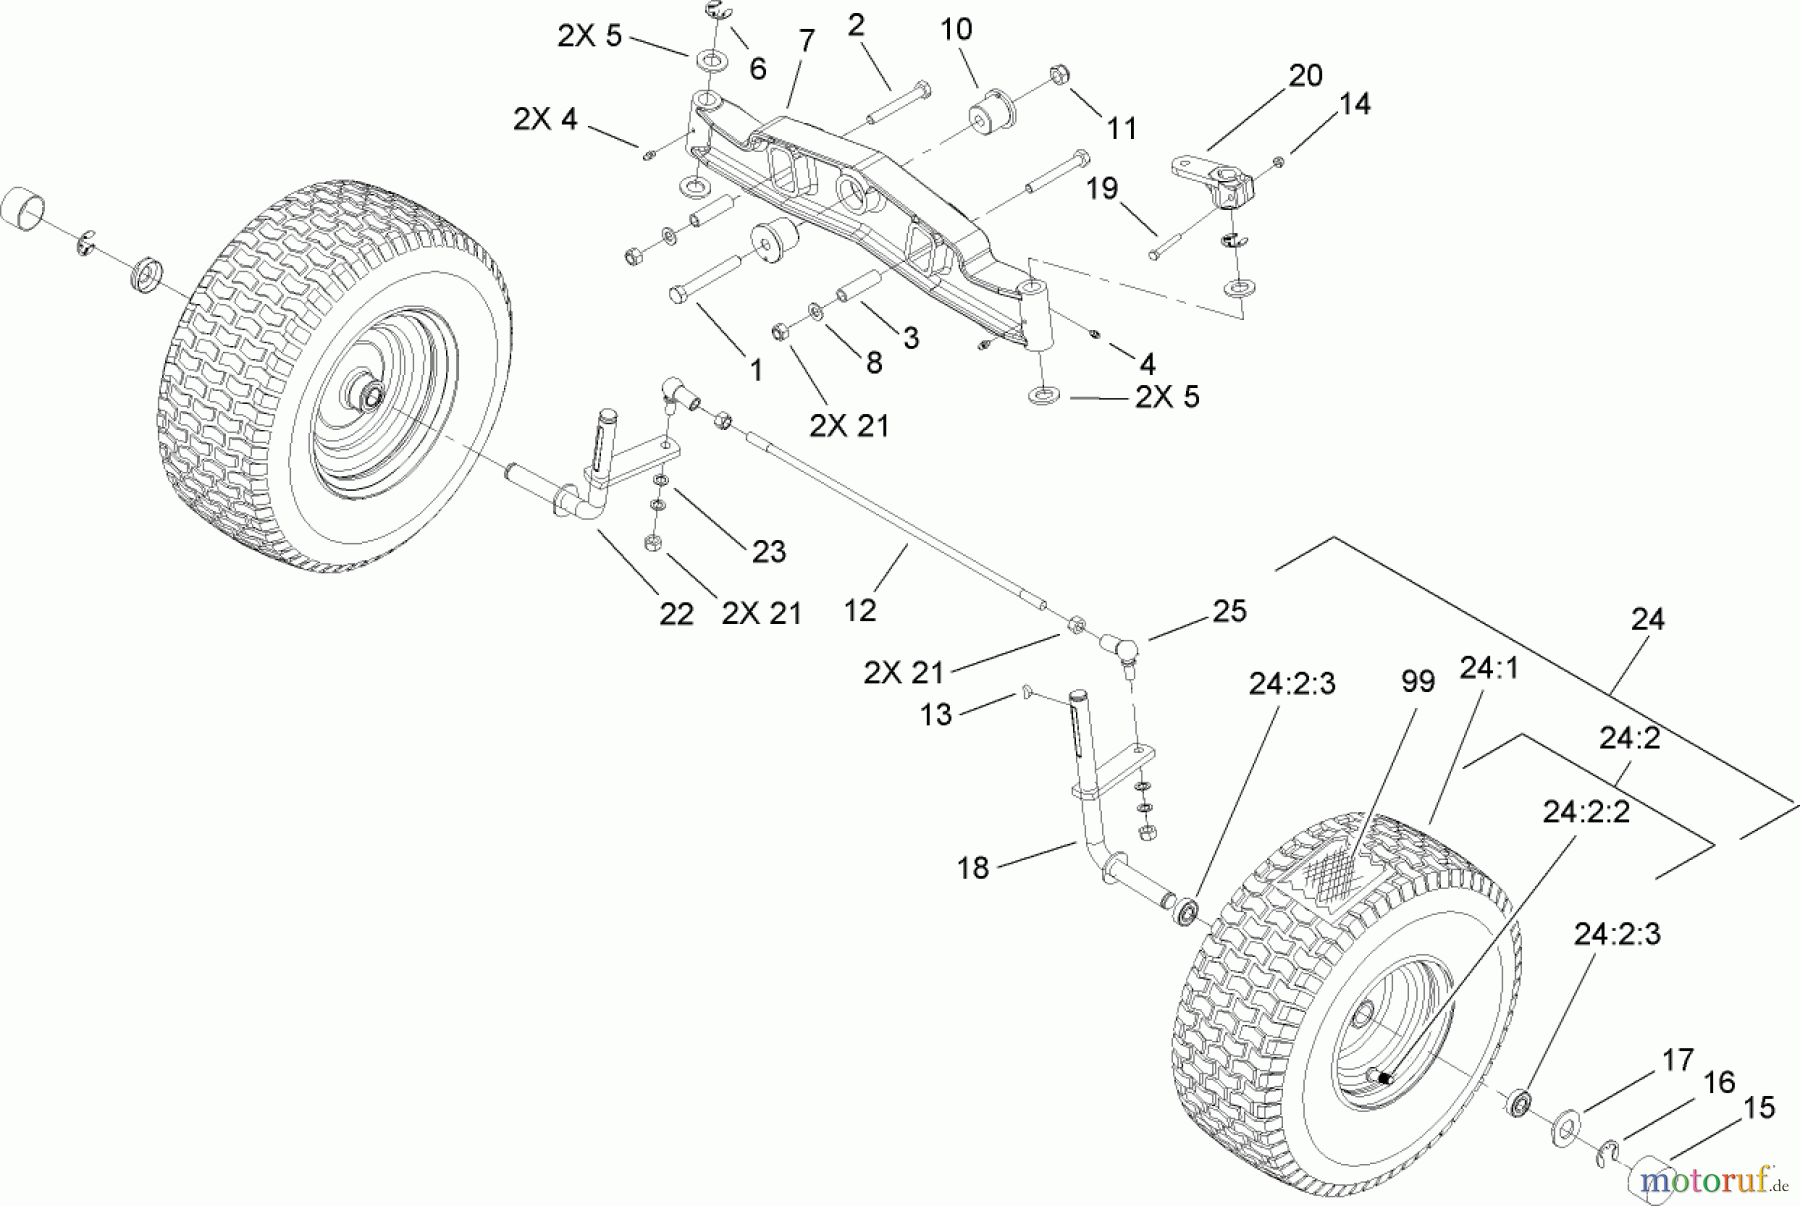  Toro Neu Mowers, Lawn & Garden Tractor Seite 1 74592 (DH 220) - Toro DH 220 Lawn Tractor, 2008 (280000529-280999999) FRONT AXLE ASSEMBLY